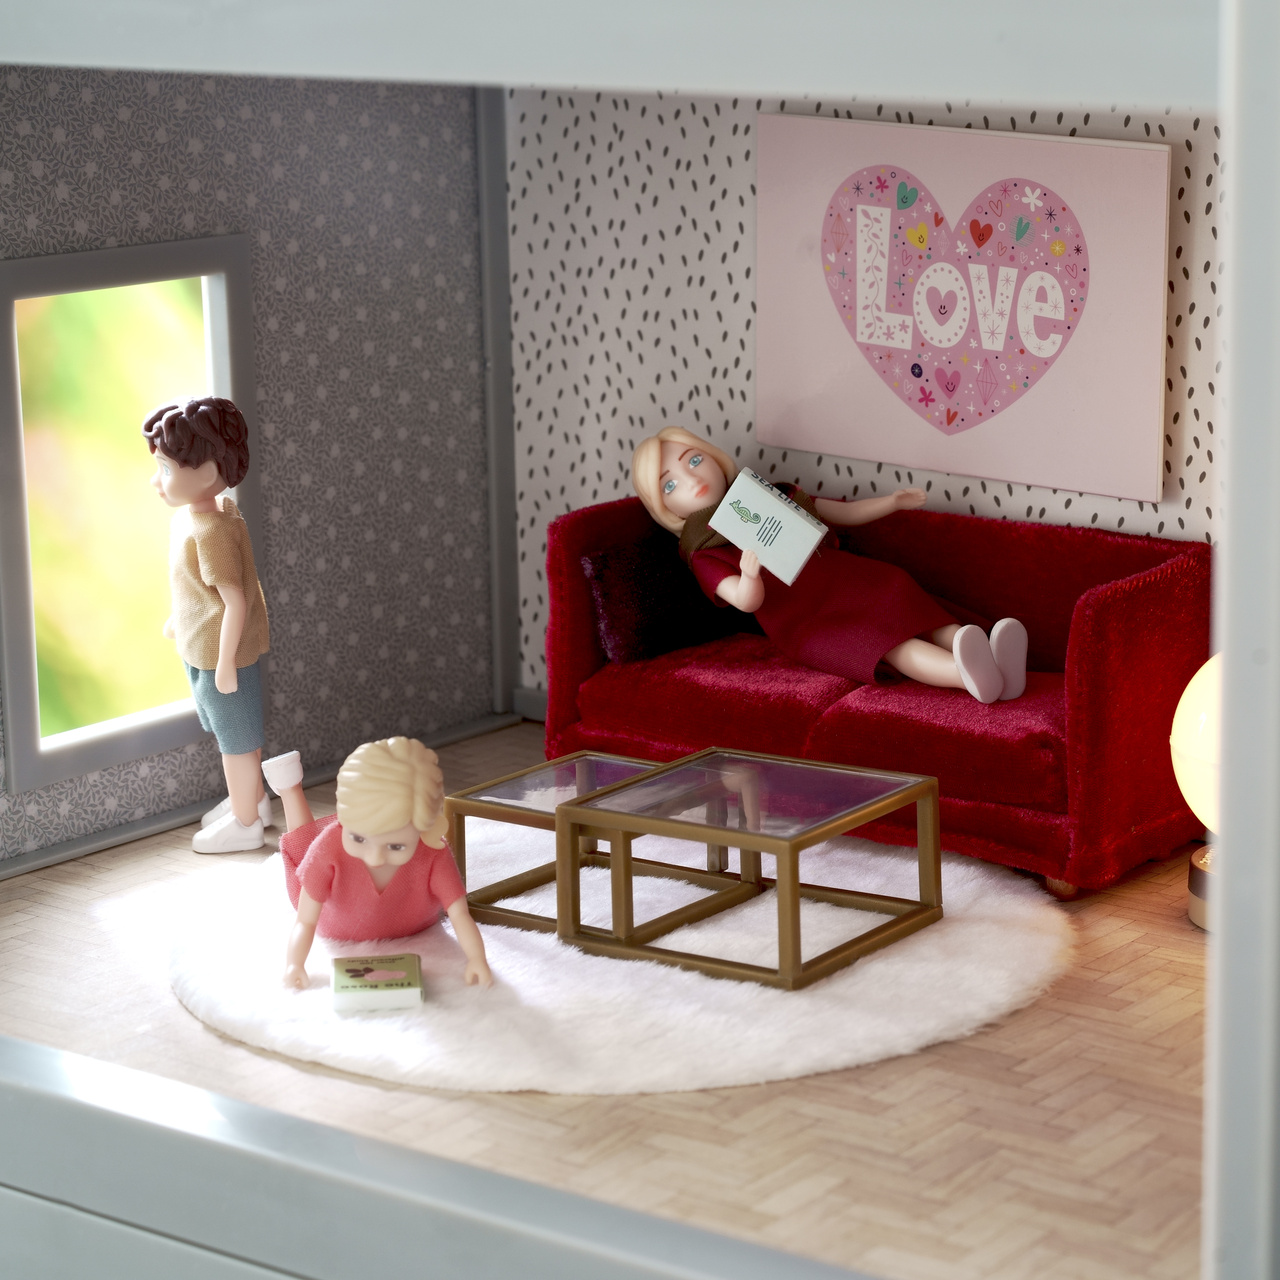 Doll house furniture & doll house accessories lundby dollhouse furniture living room set red